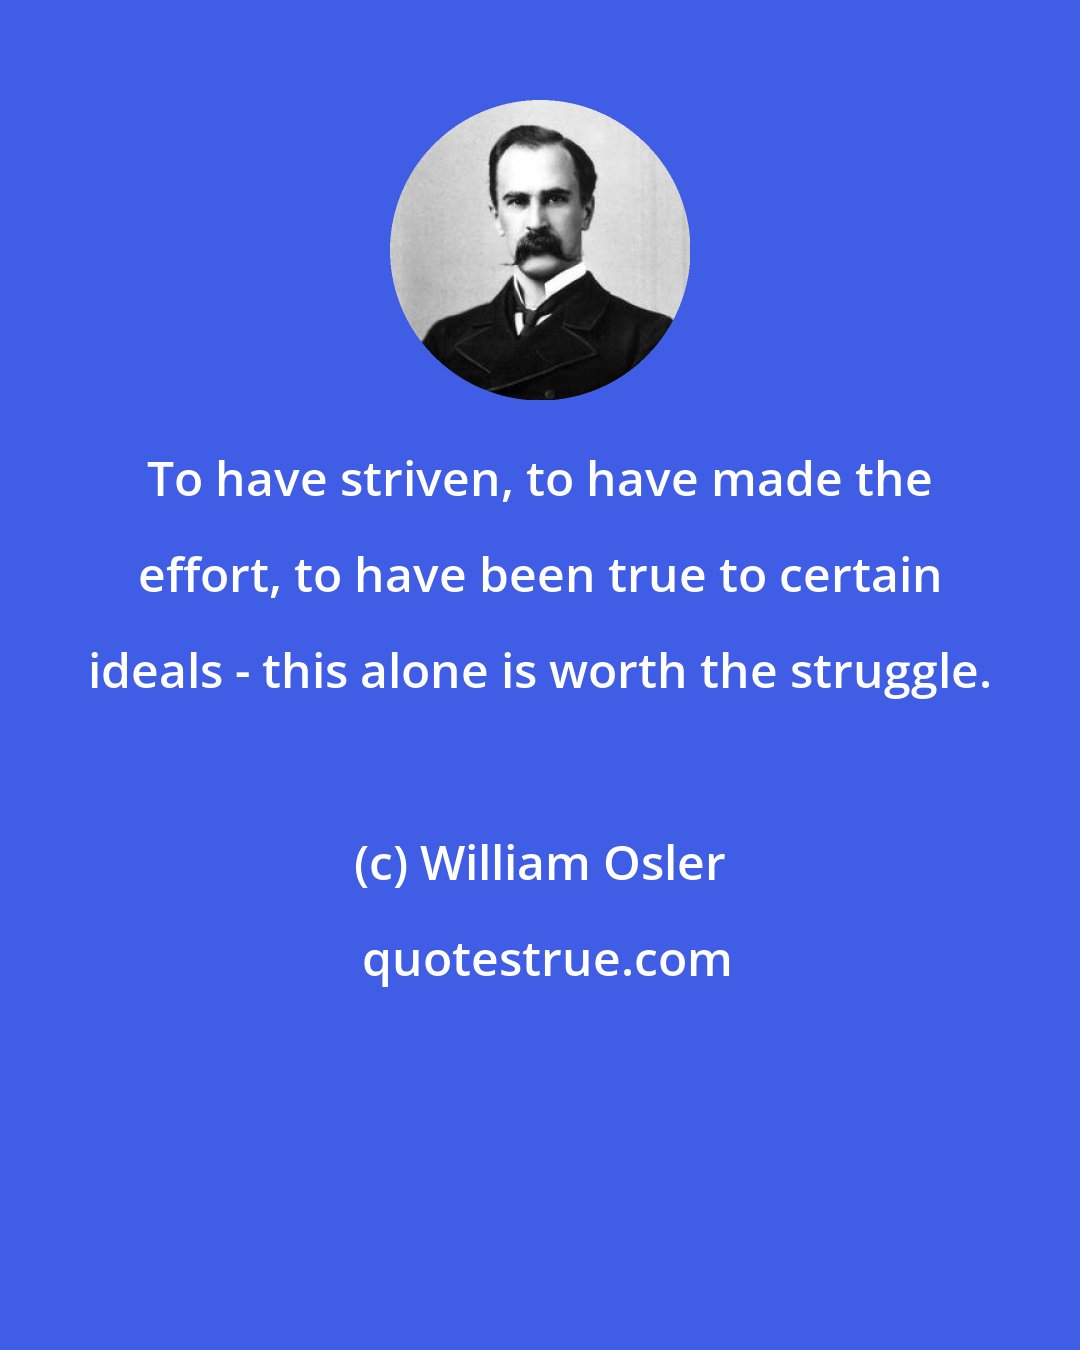 William Osler: To have striven, to have made the effort, to have been true to certain ideals - this alone is worth the struggle.